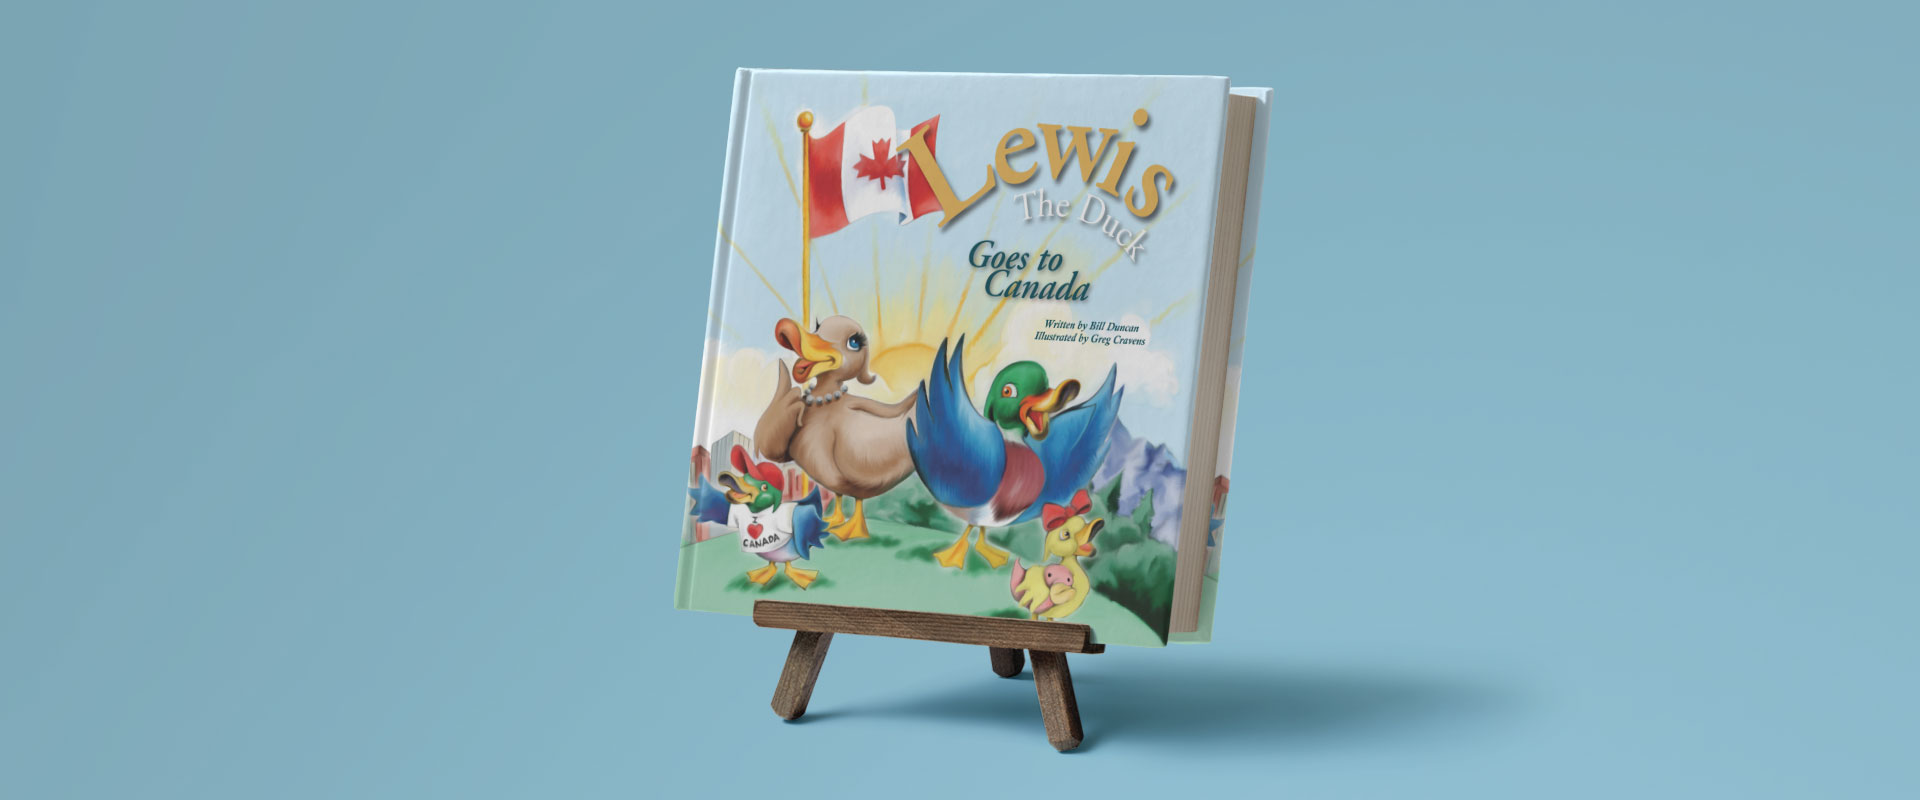 Lewis the Duck Goes to Canada book